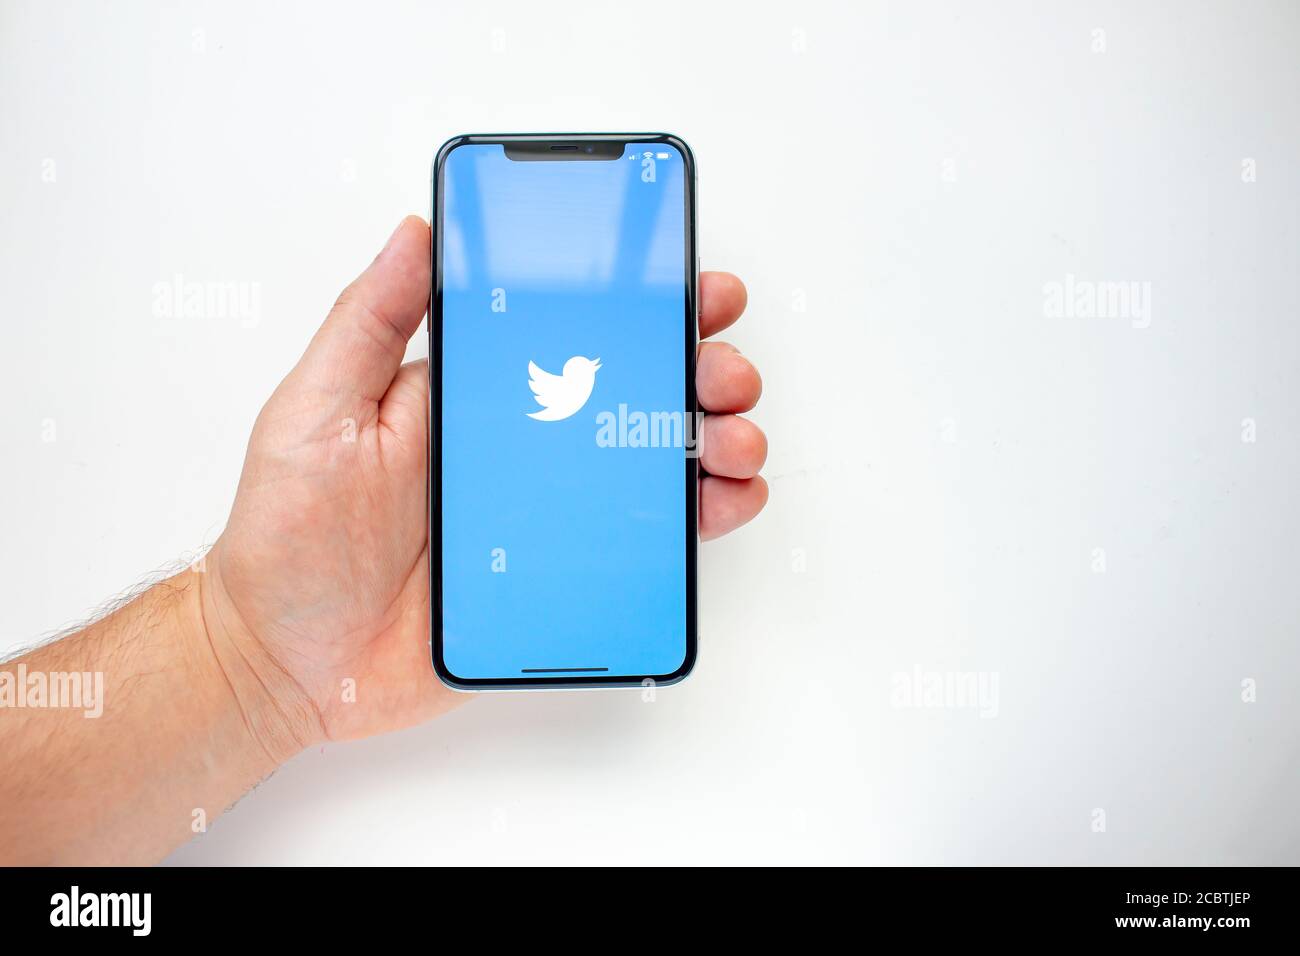 Calgary, Alberta, Canada. Aug 15, 2020. A person holding an iPhone 11 Pro Max with the Twitter App Stock Photo